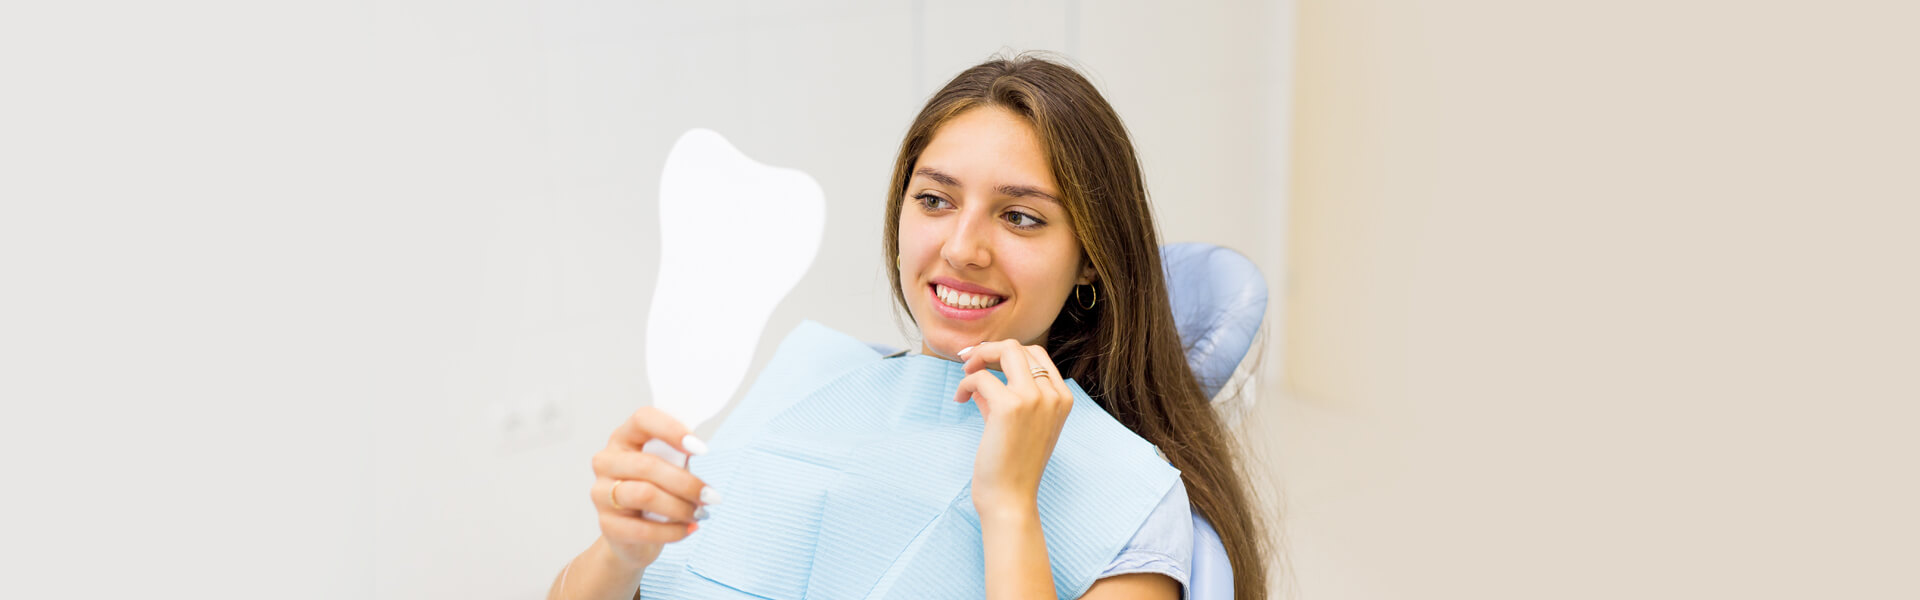 How You Can Improve Your Dental Health On World Smile Day